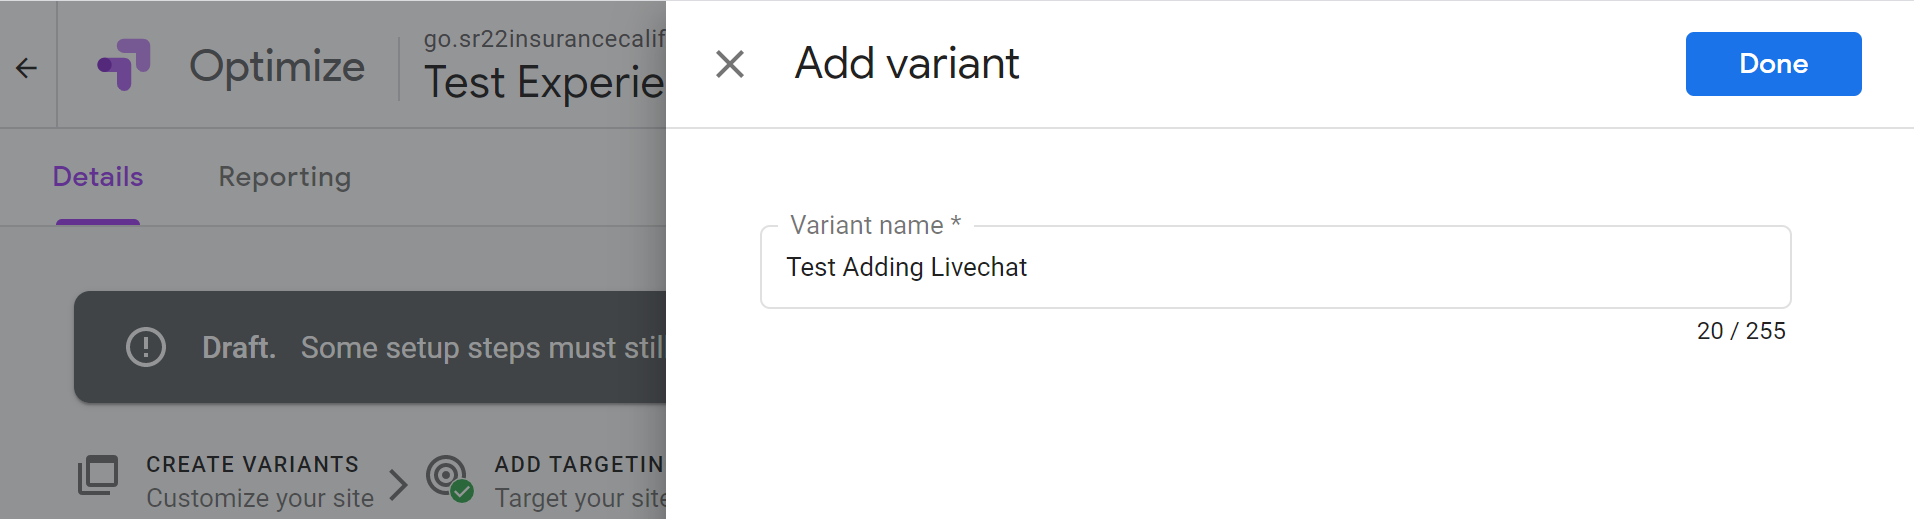 Adding a variant called test adding livechat